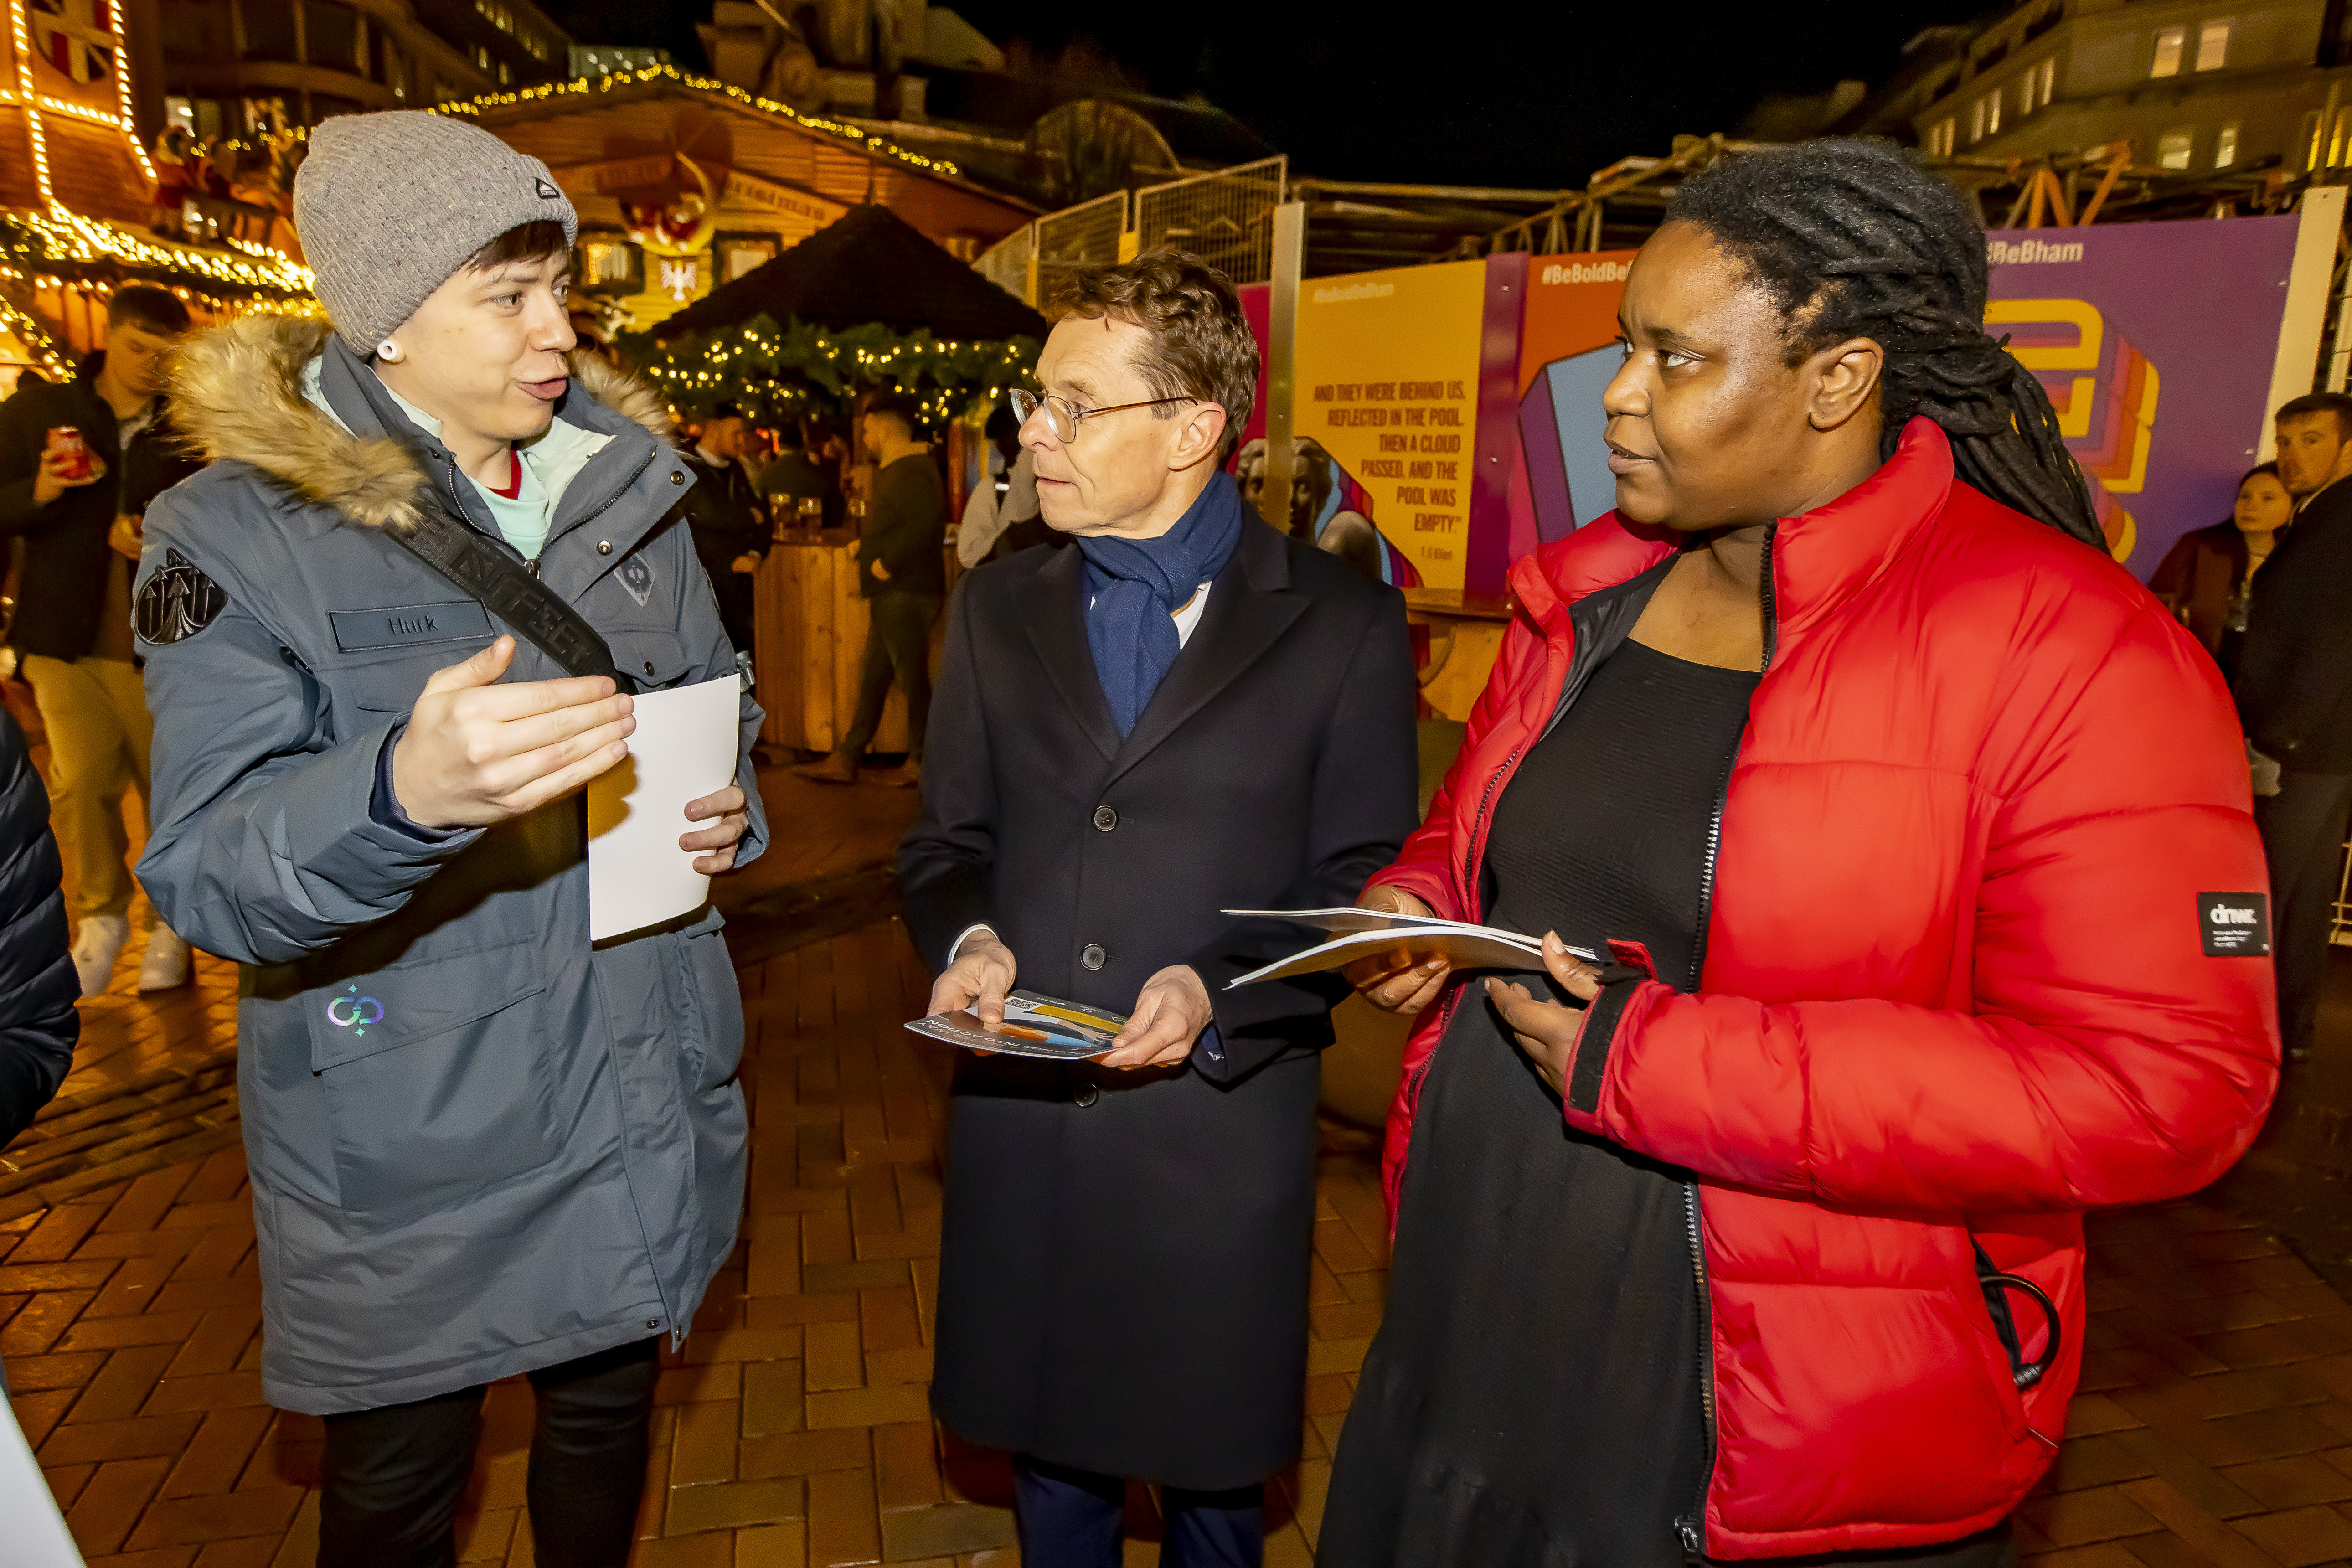 Andy Street, Mayor of the West Midlands, and Cllr Sharon Thompson, chair of the WMCA Homelessness Taskforce Members Advisory Group, speak with visitors at the Birmingham Christmas Market.